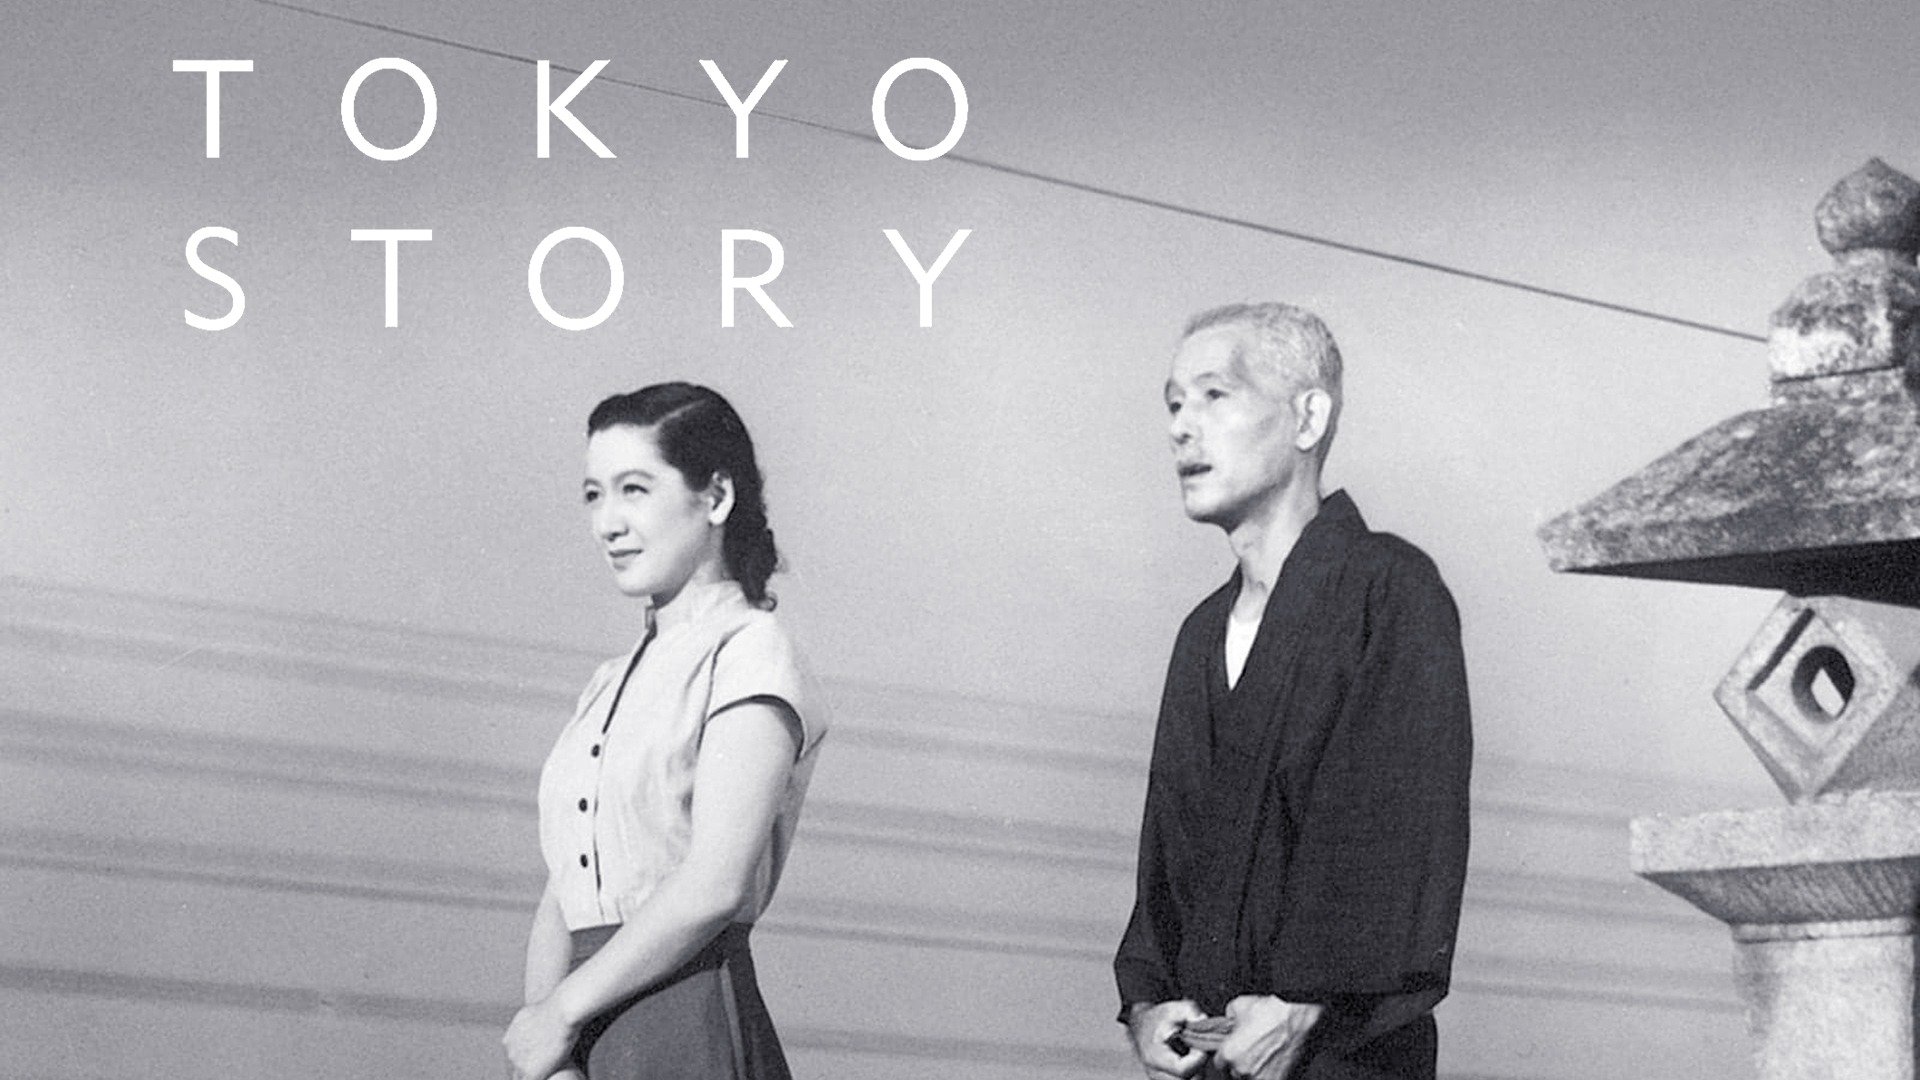 44-facts-about-the-movie-tokyo-story